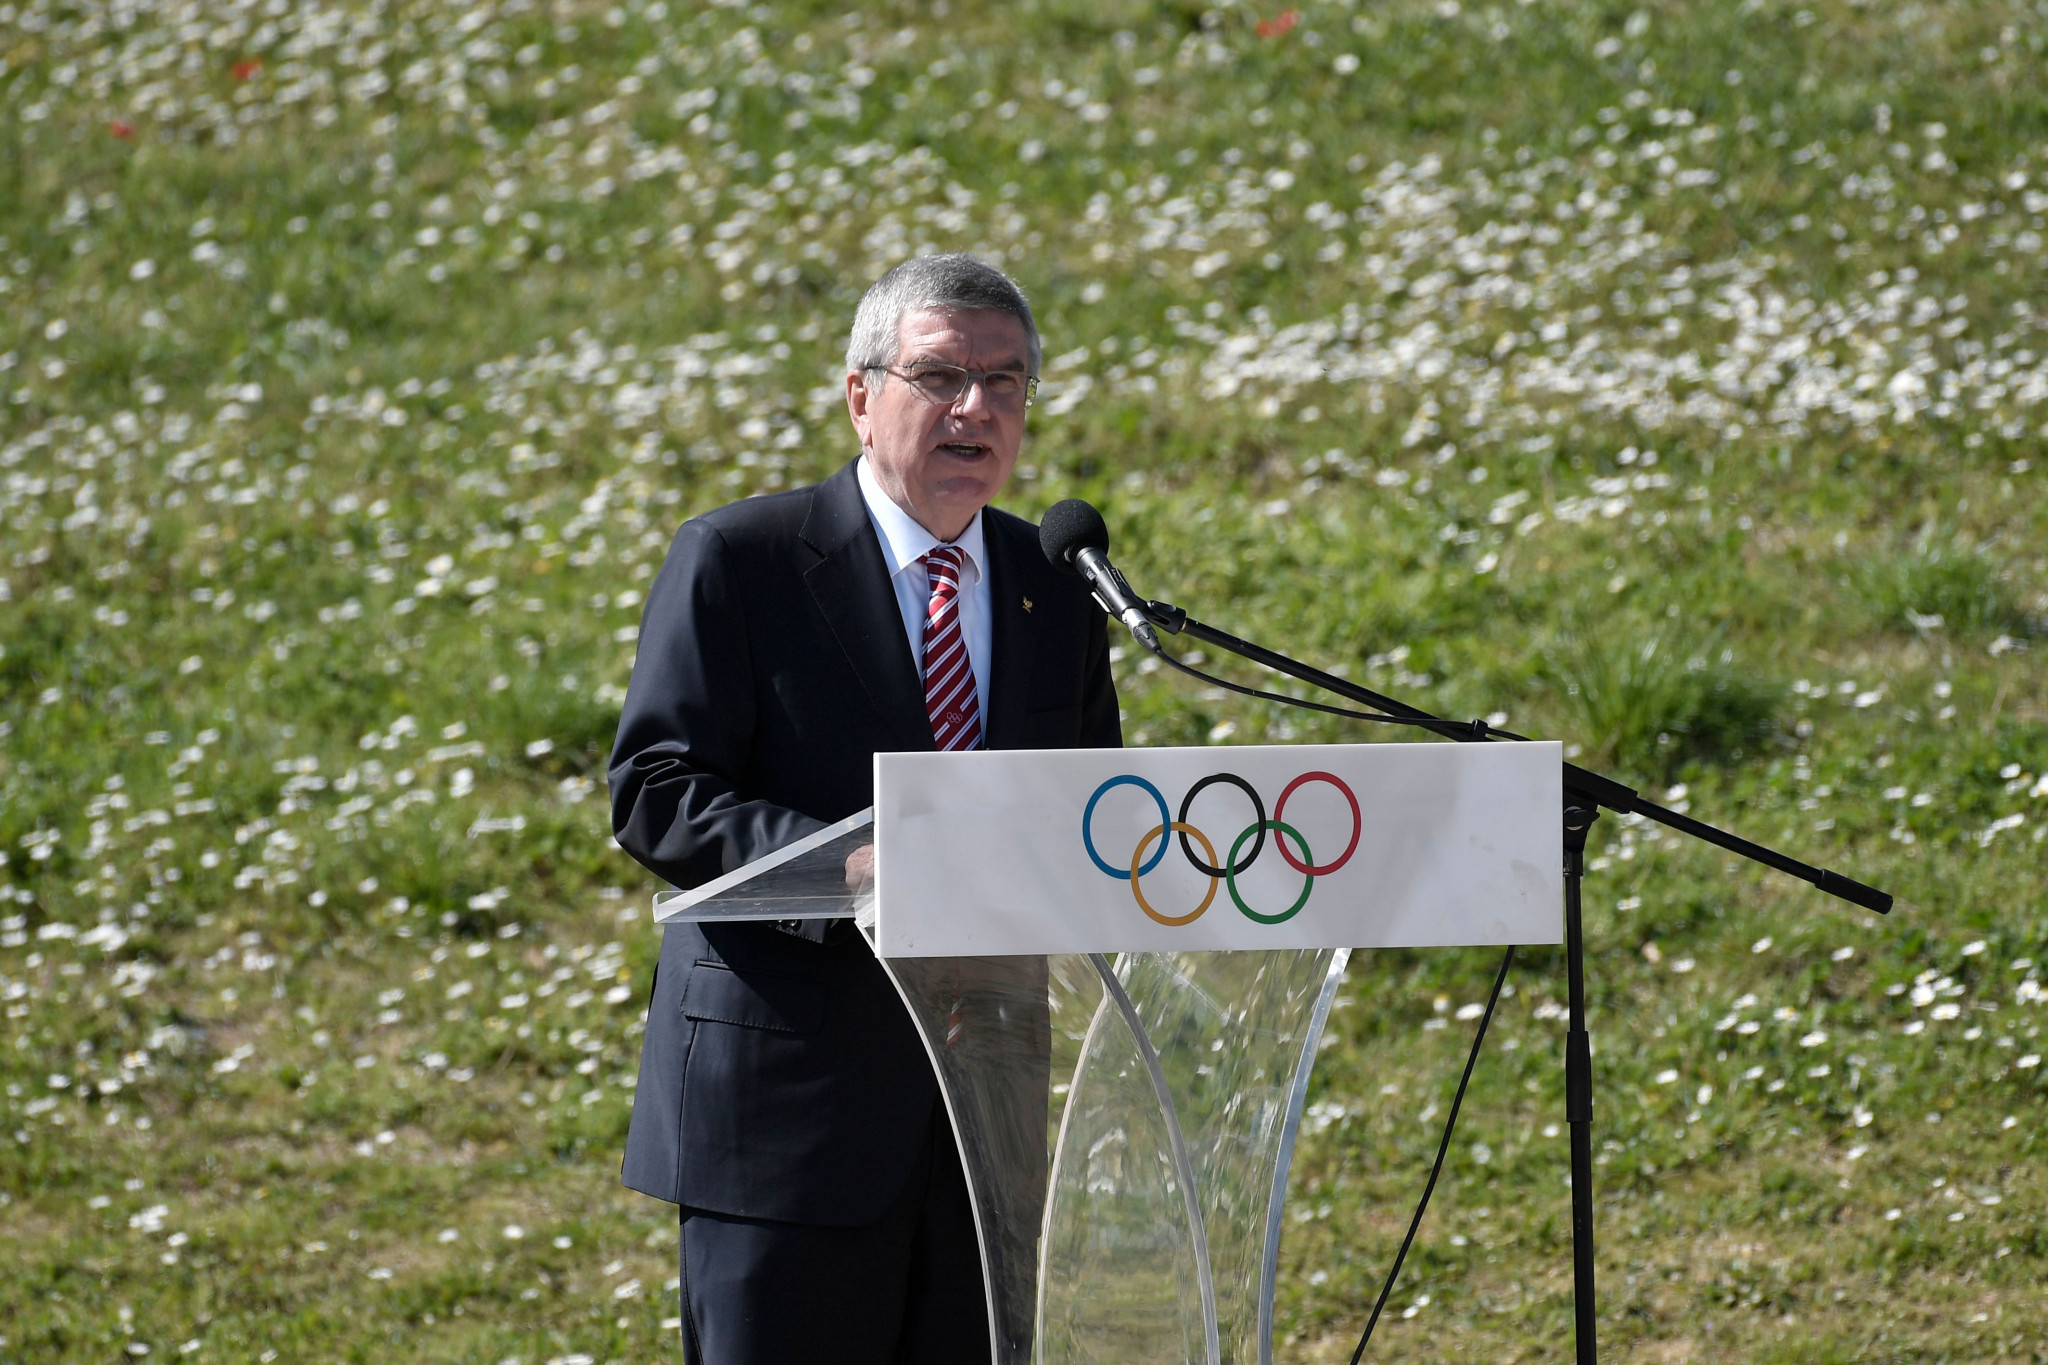 International Olympic Committee President Thomas Bach attended the scaled-back event ©Getty Images